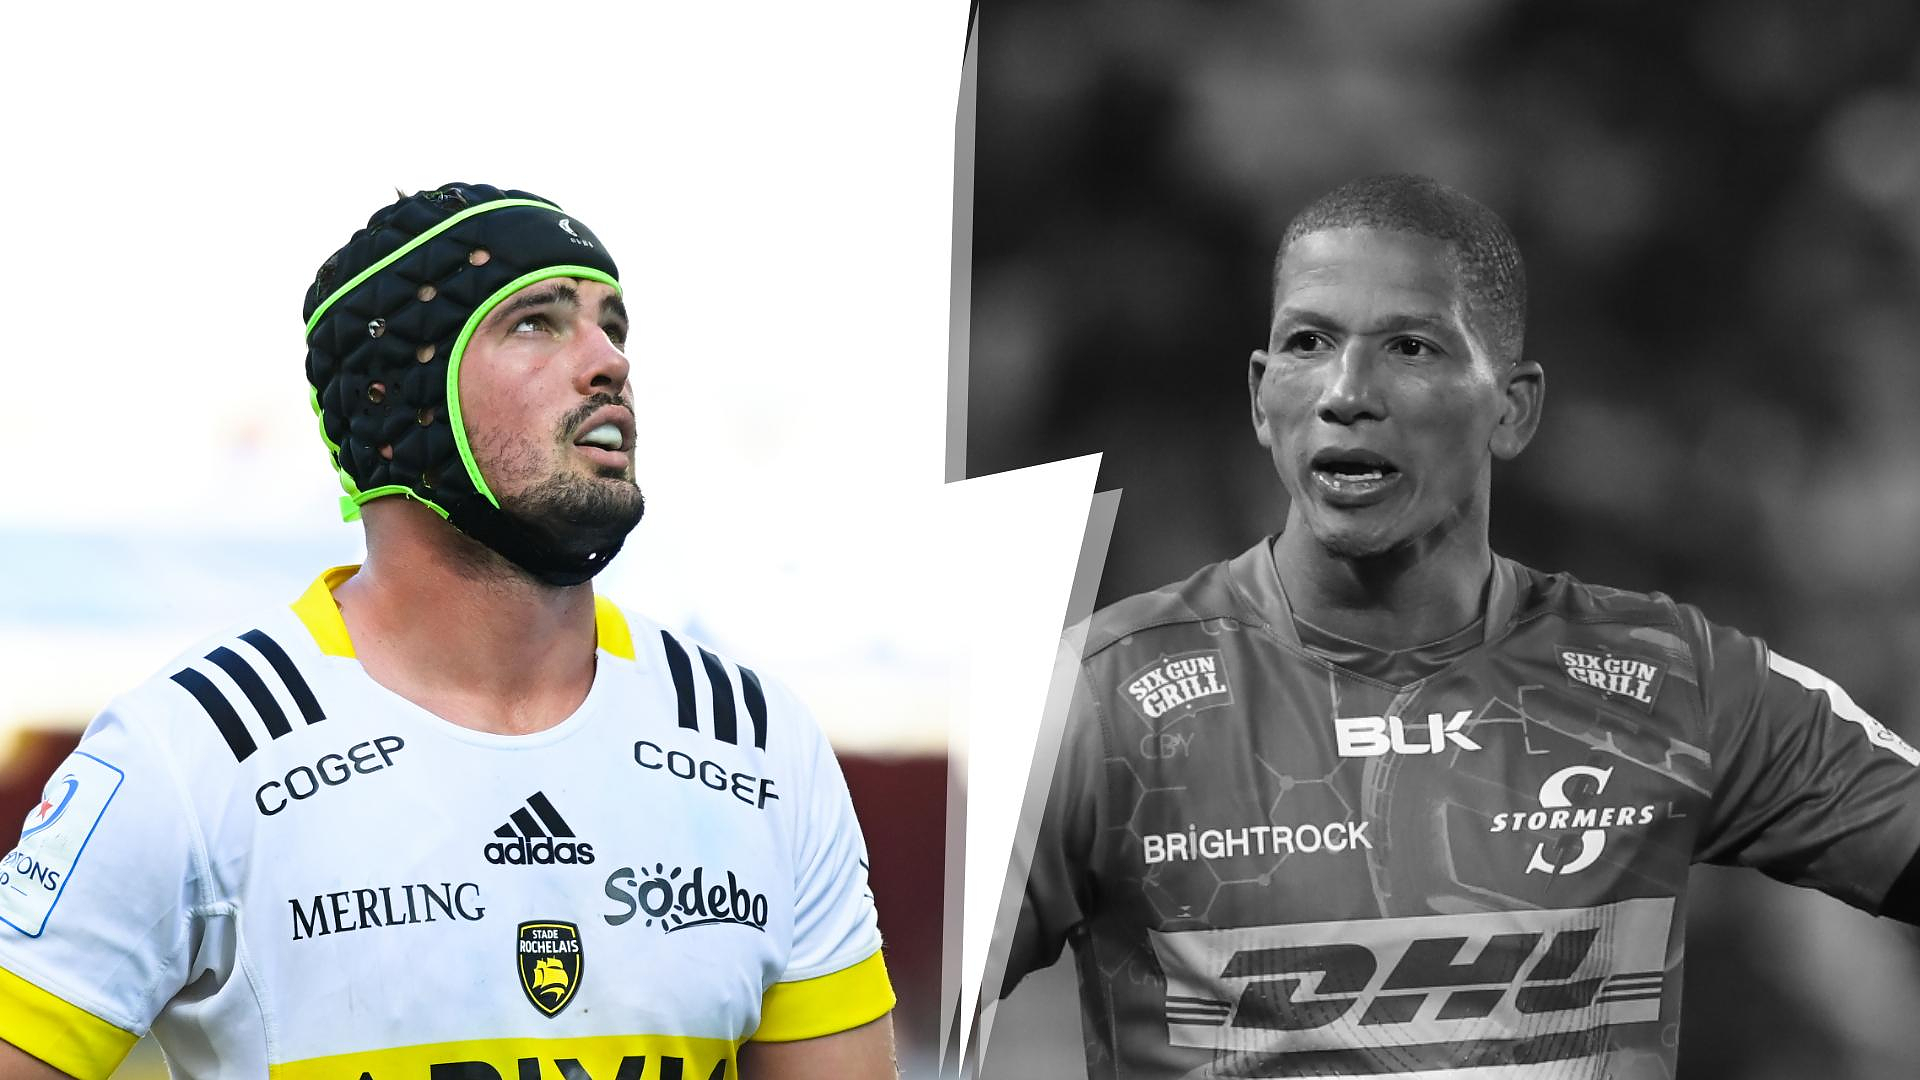 Stormers-La Rochelle: a reaction from a (double) champion, Libbok's failure... The tops and the flops